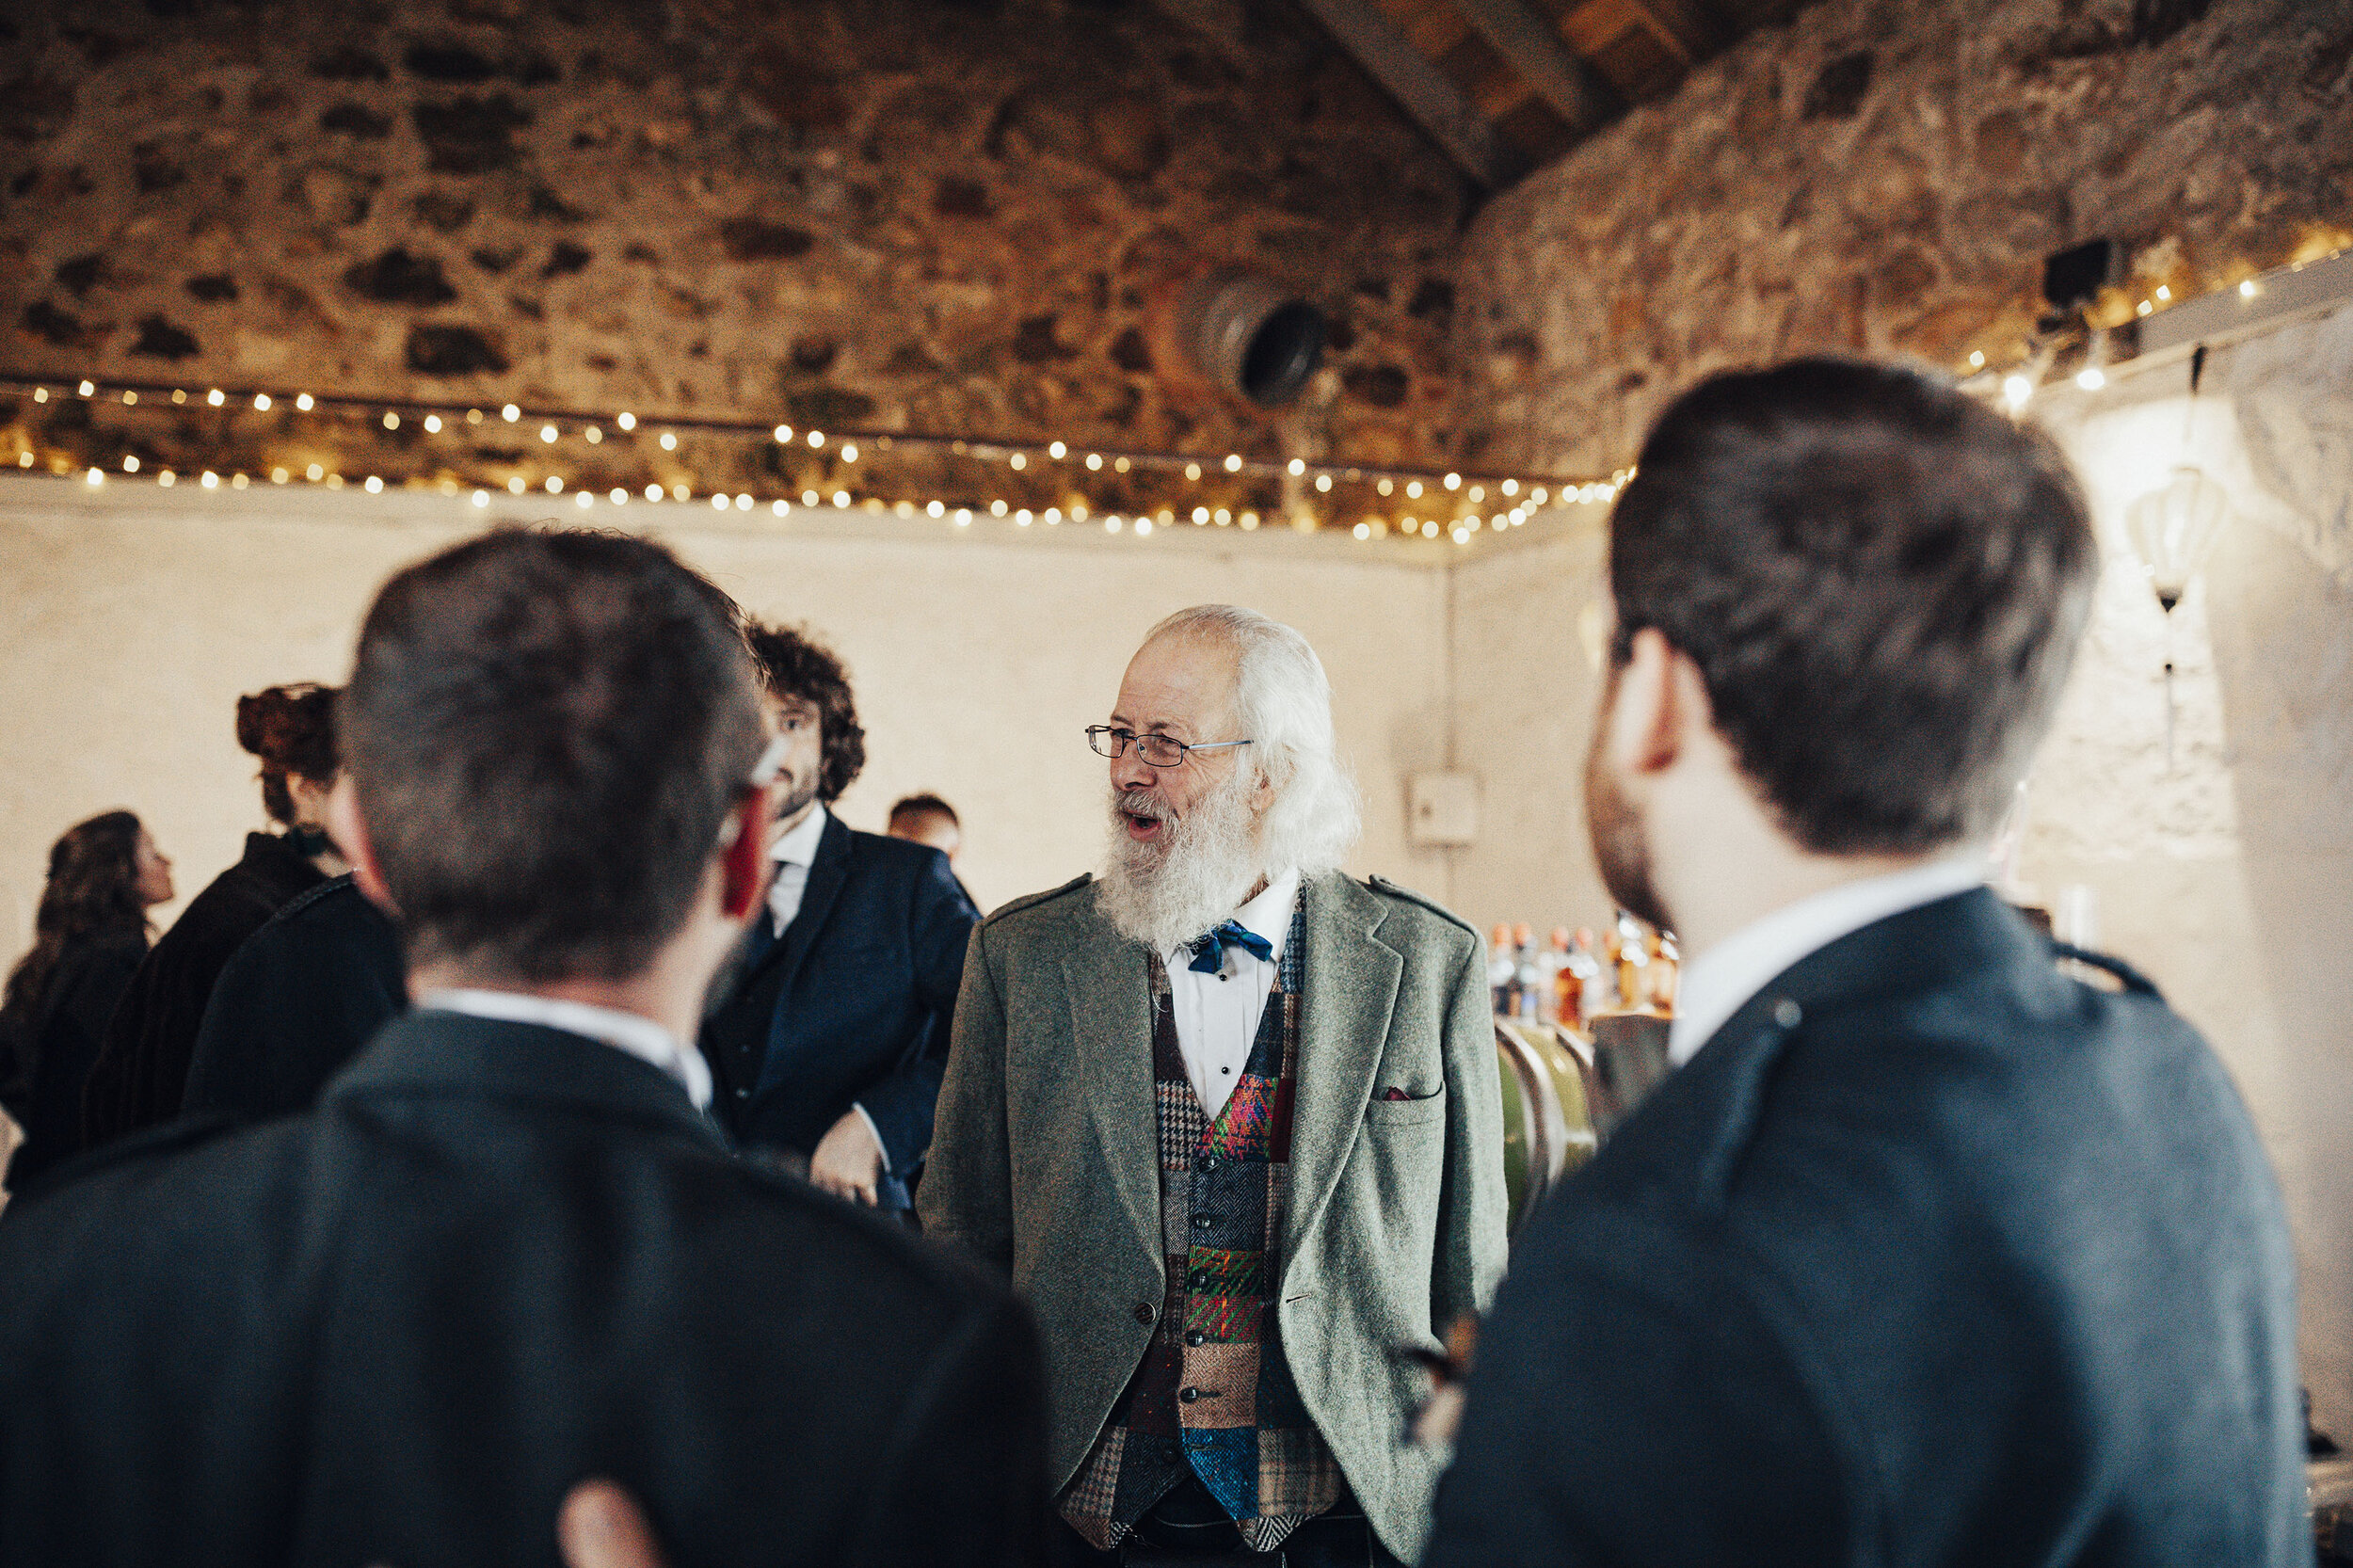 COW_SHED_CRAIL_WEDDING_PJ_PHILLIPS_PHOTOGRAPHY_79.jpg